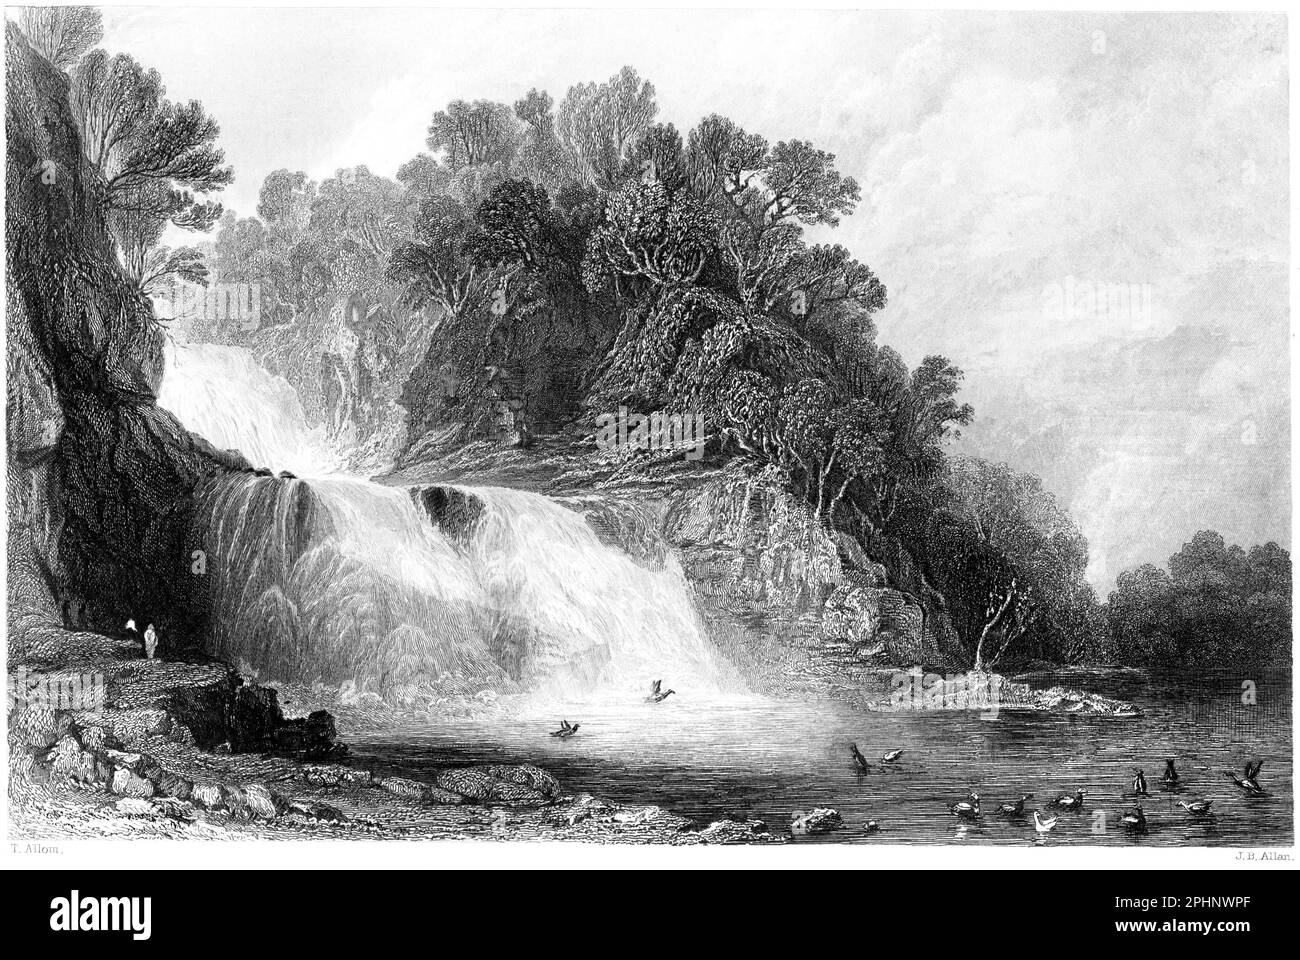 An engraving of Corra Lynn (Corra Linn) on the Clyde, Lanarkshire, Scotland UK scanned at high resolution from a book printed in 1840. Stock Photo